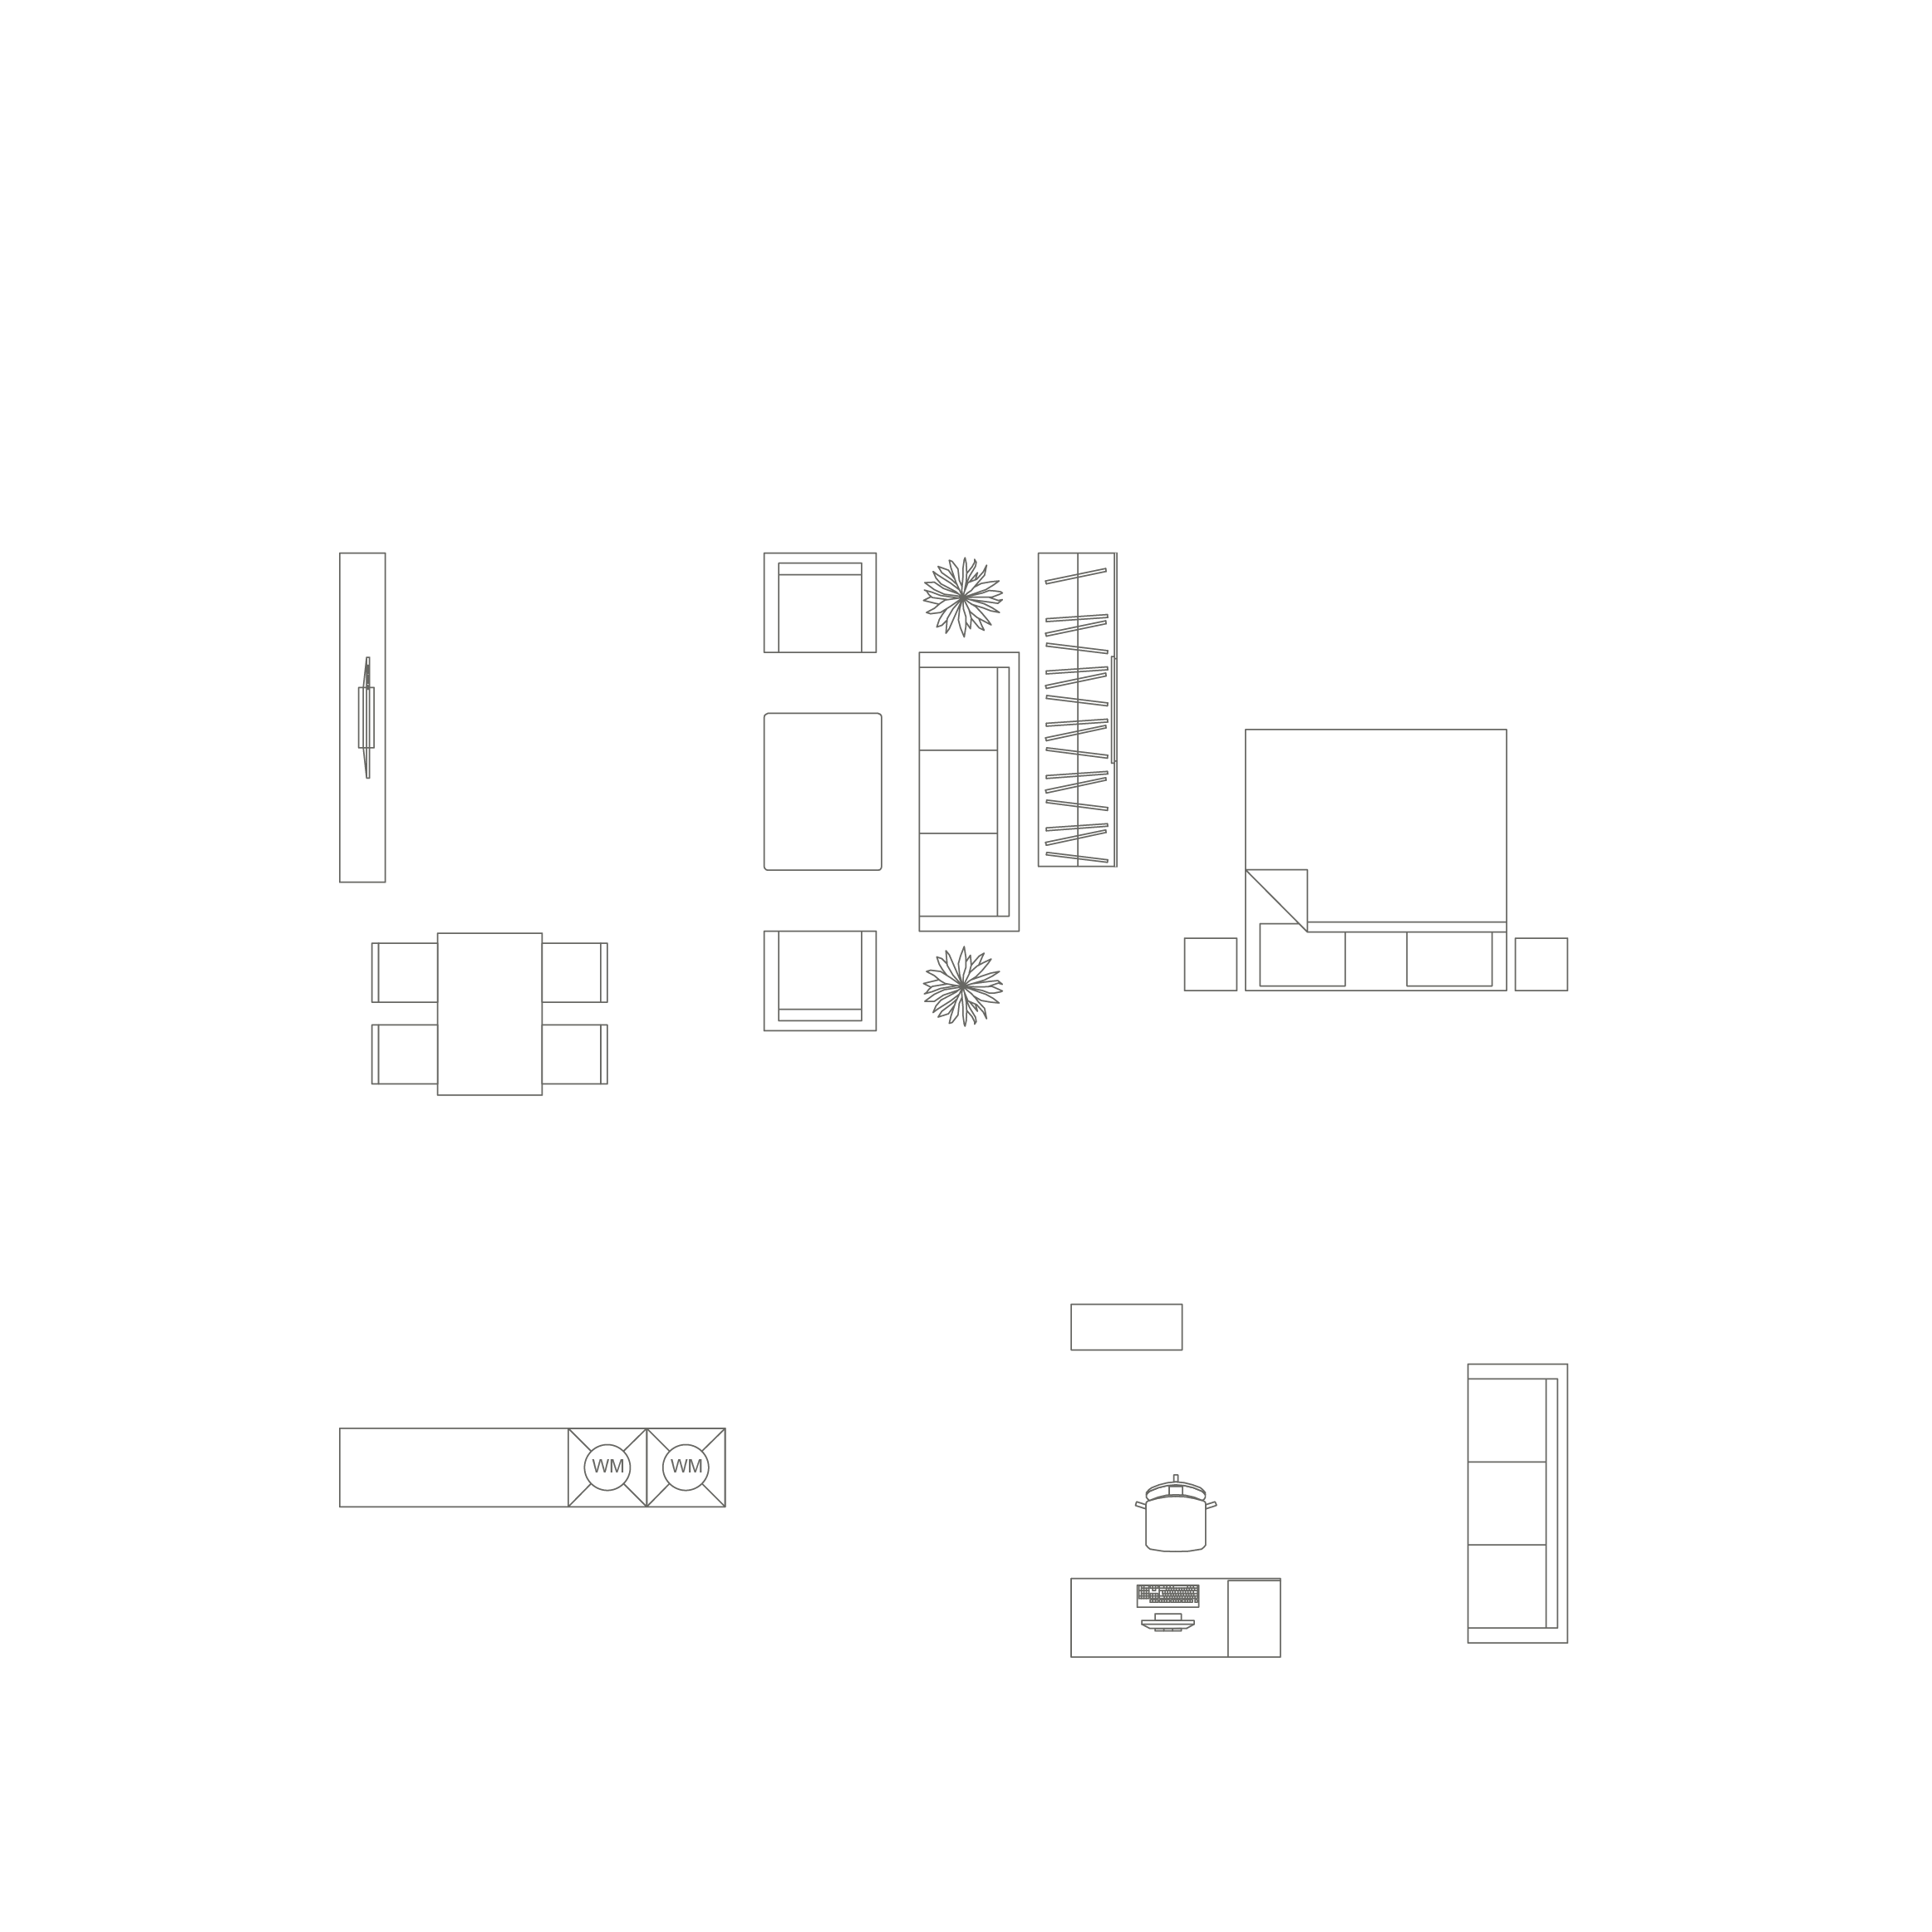 Floor plan design black and white with furniture